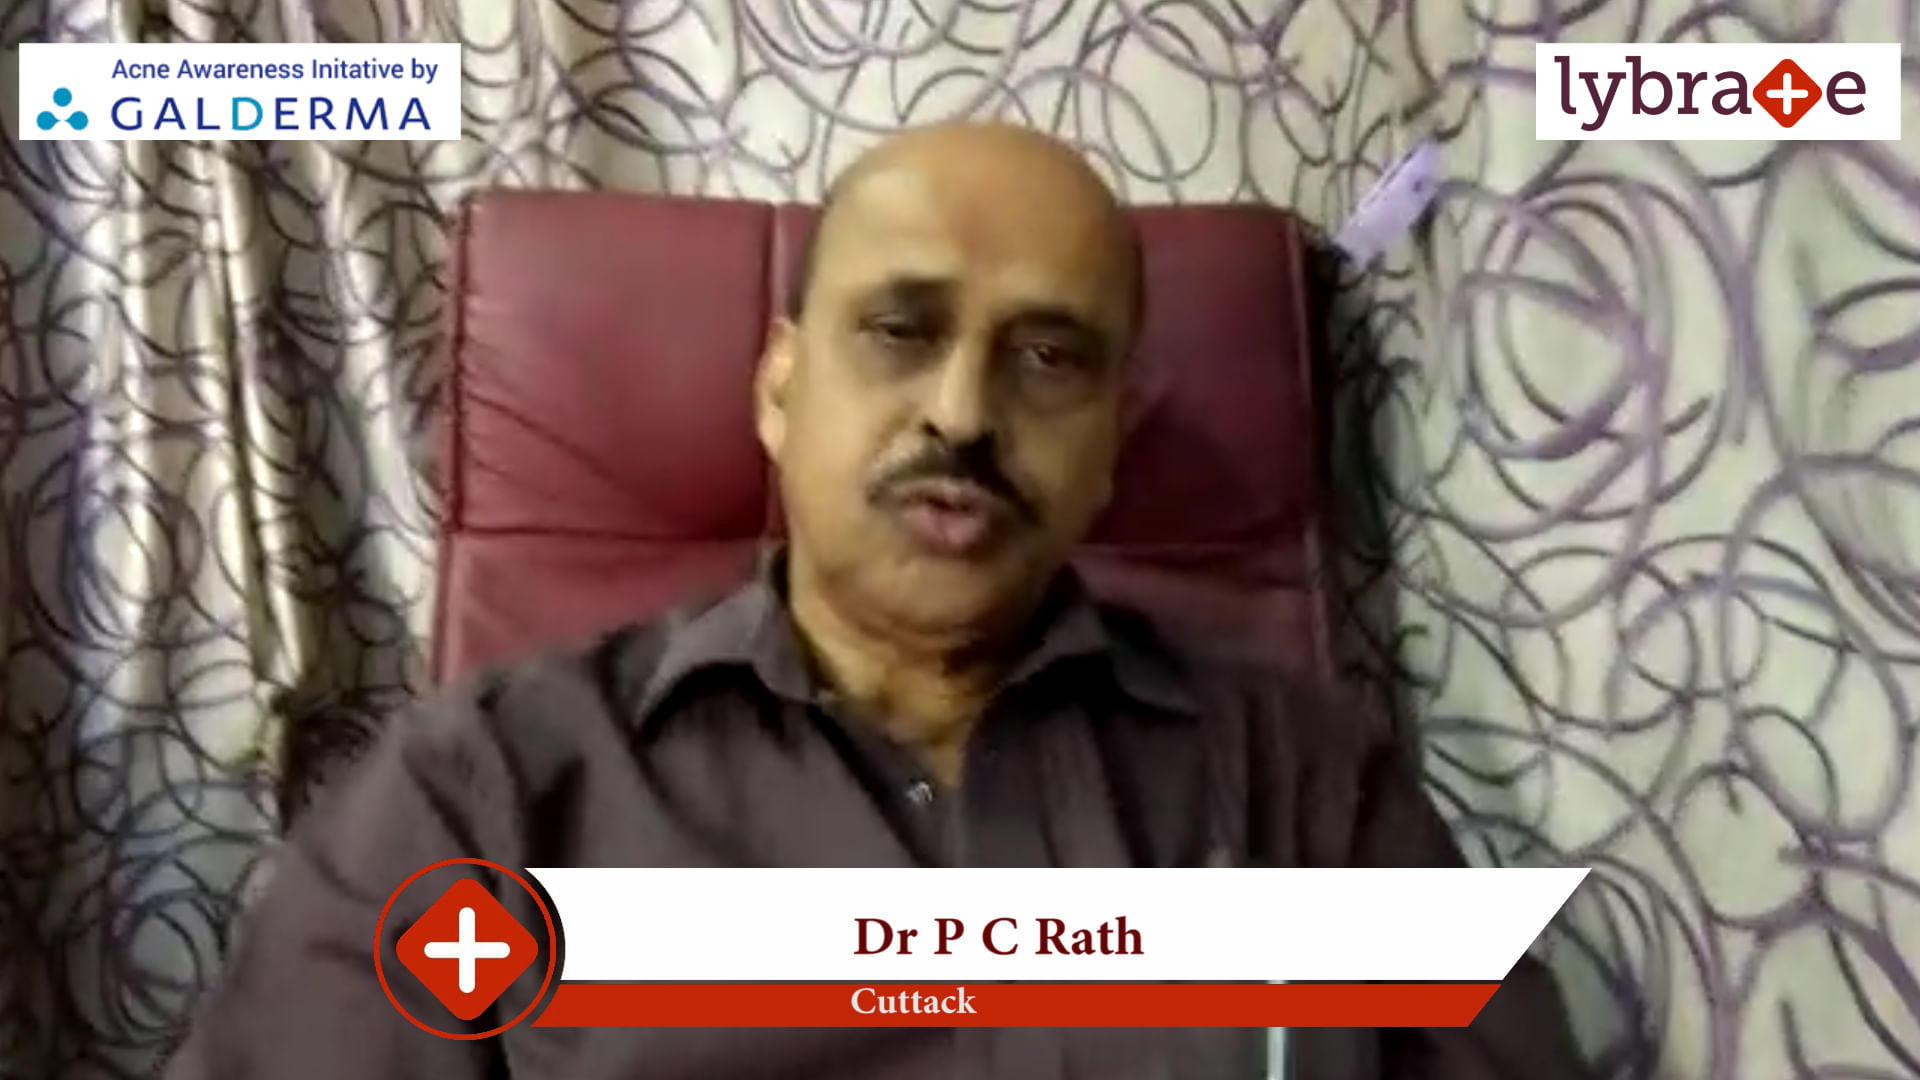 Lybrate | Dr. P C Rath speaks on IMPORTANCE OF TREATING ACNE EARLY